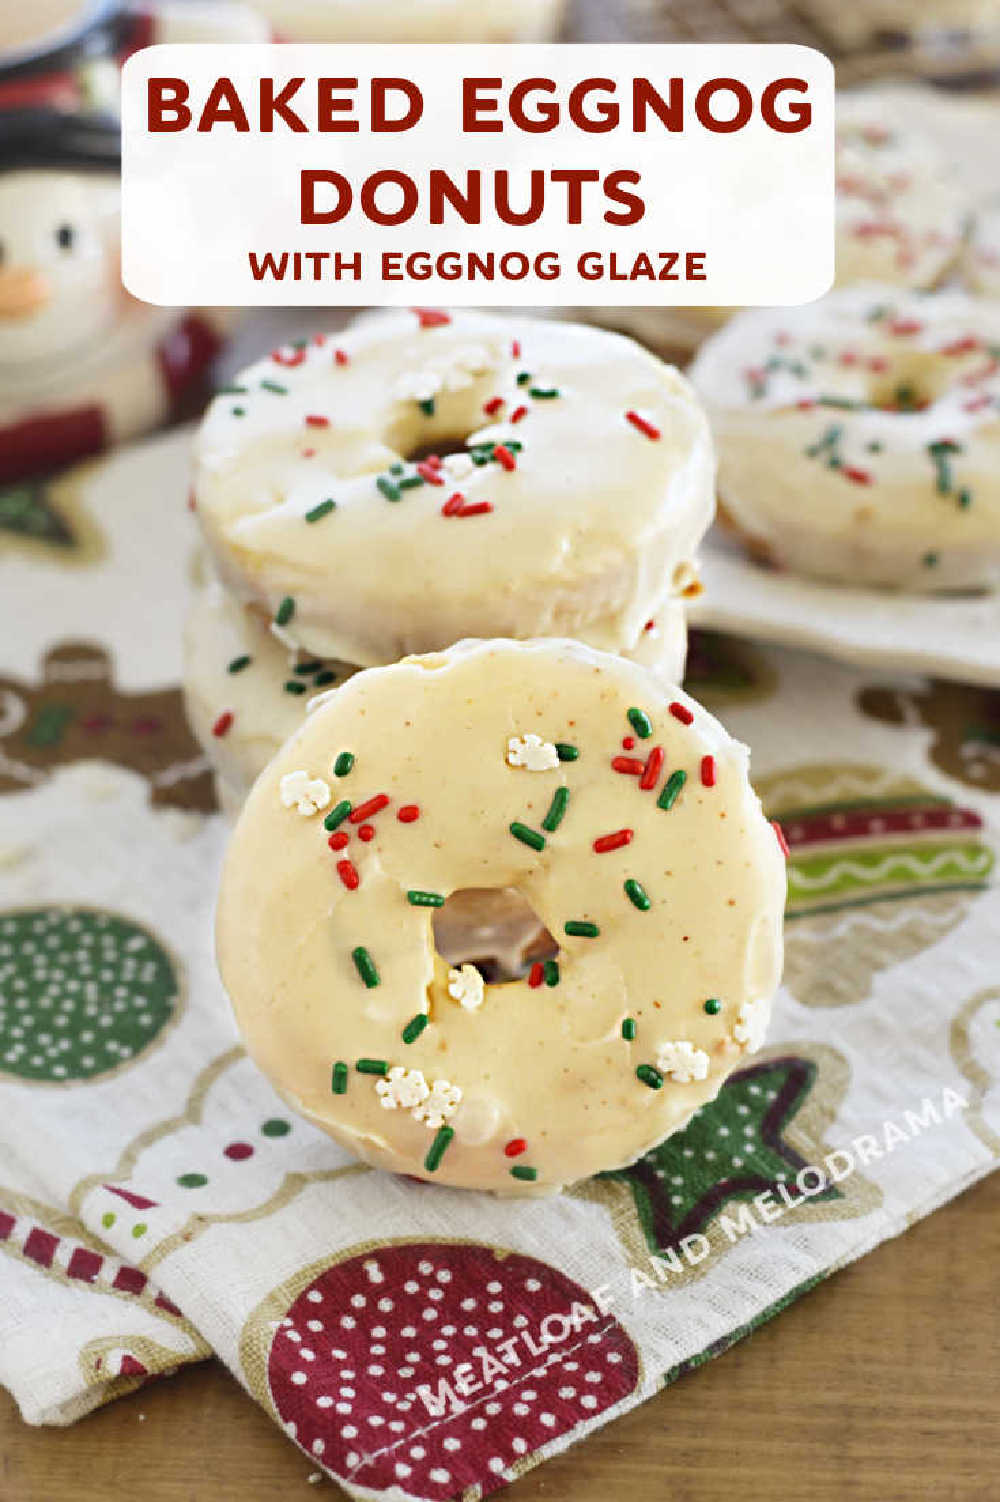 Baked Eggnog Donuts (Christmas Donuts) are made with cake mix and topped with an easy eggnog glaze. Perfect for Christmas morning breakfast and as a sweet treat throughout the holiday season! Your whole family will love this easy donut recipe! via @meamel